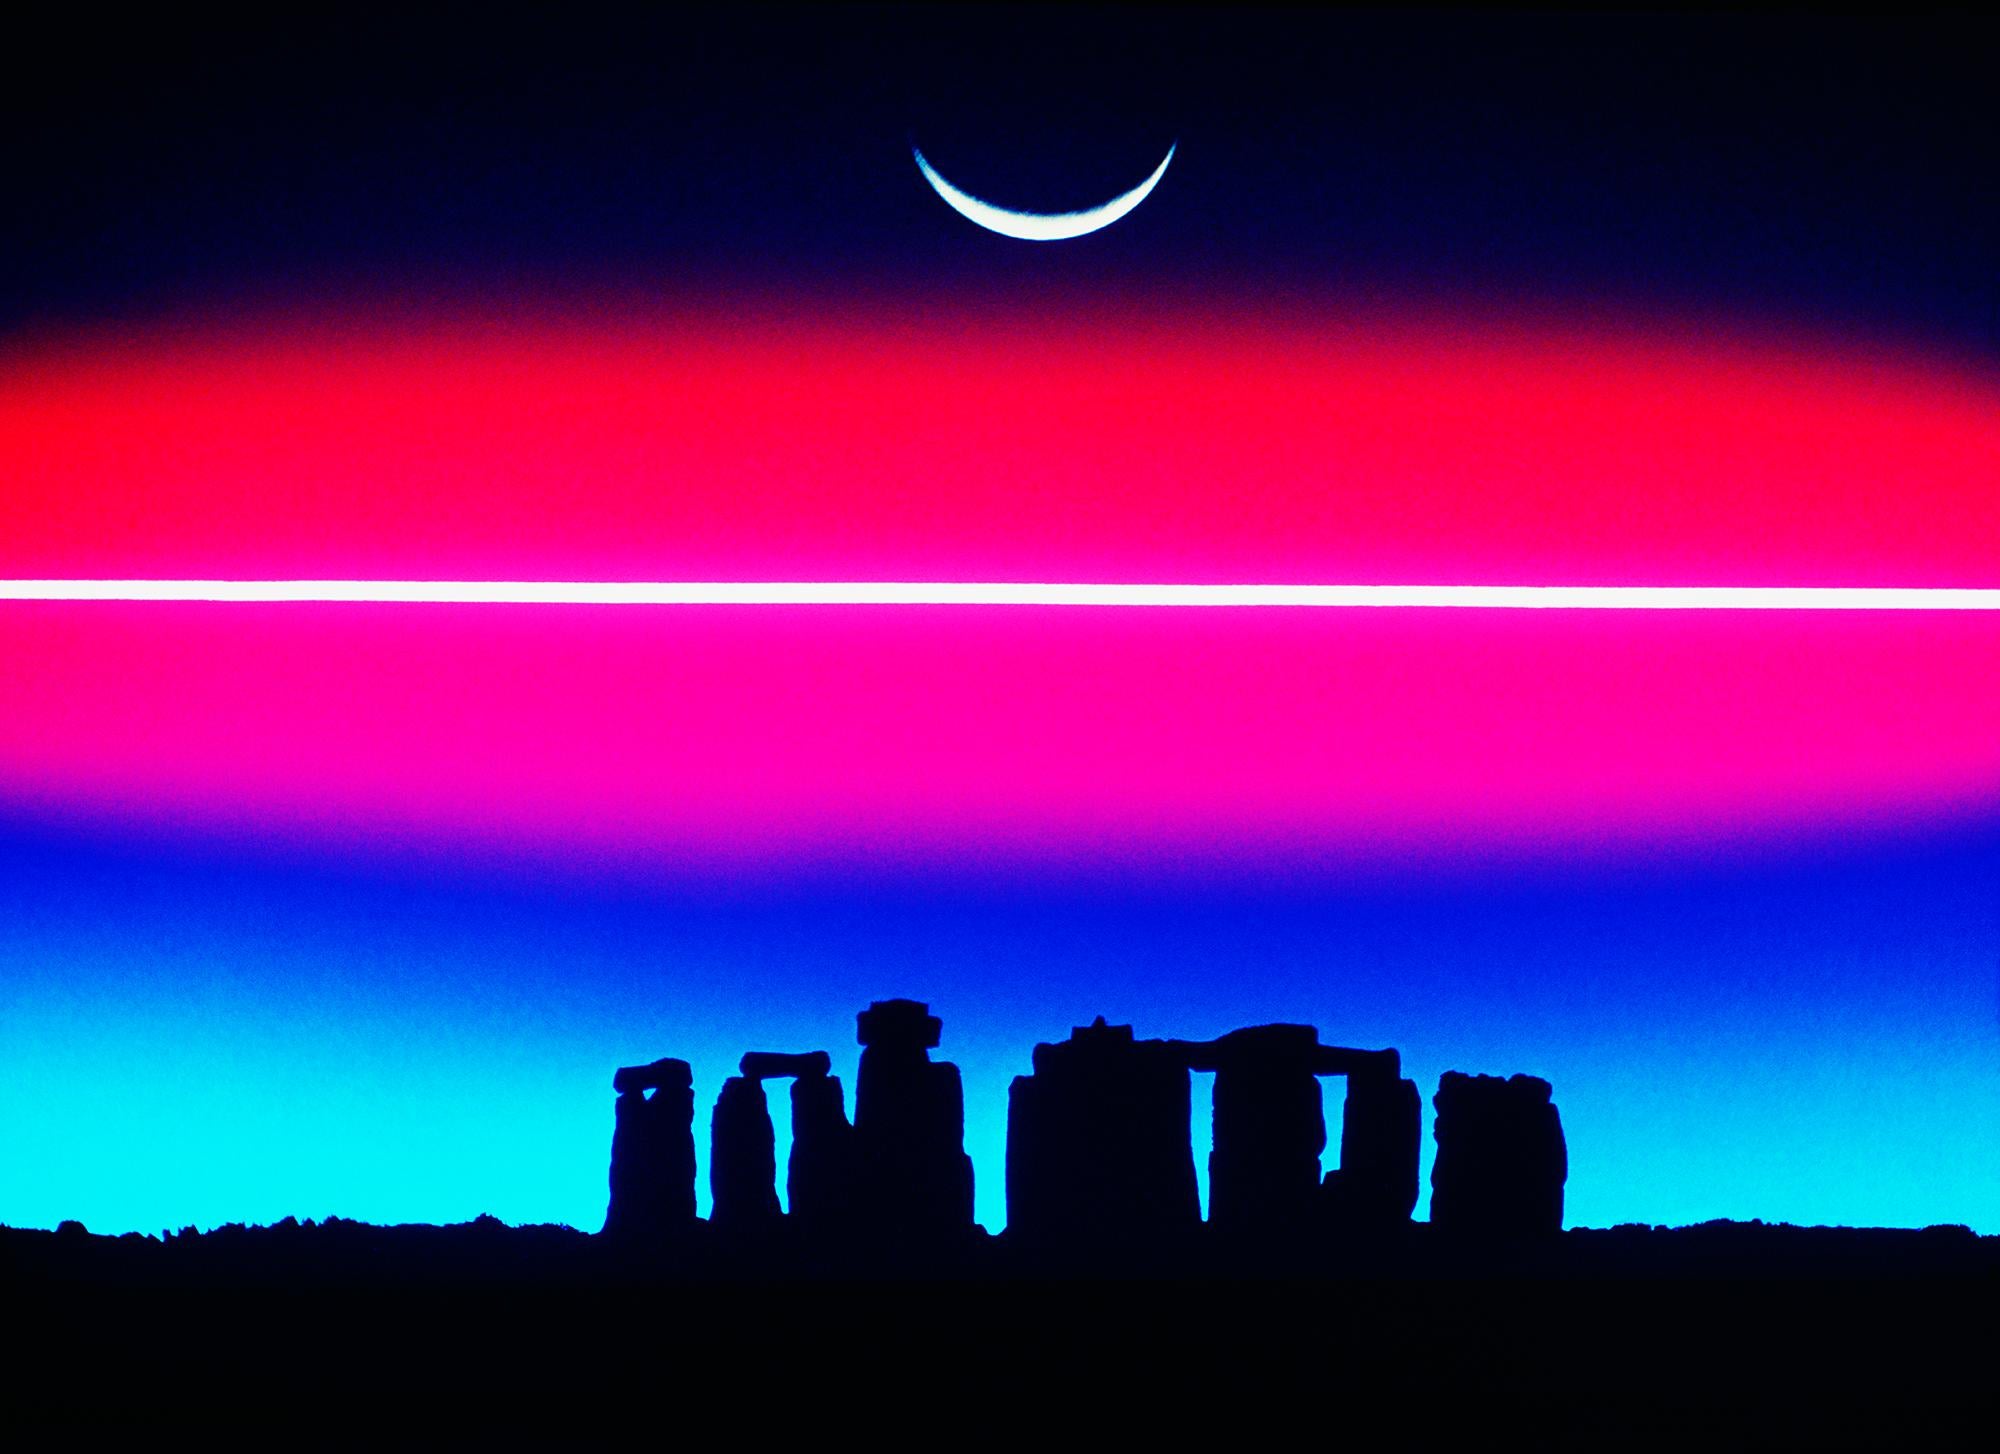 Stonehenge and Eclipse with Pink Sci-Fi Glow